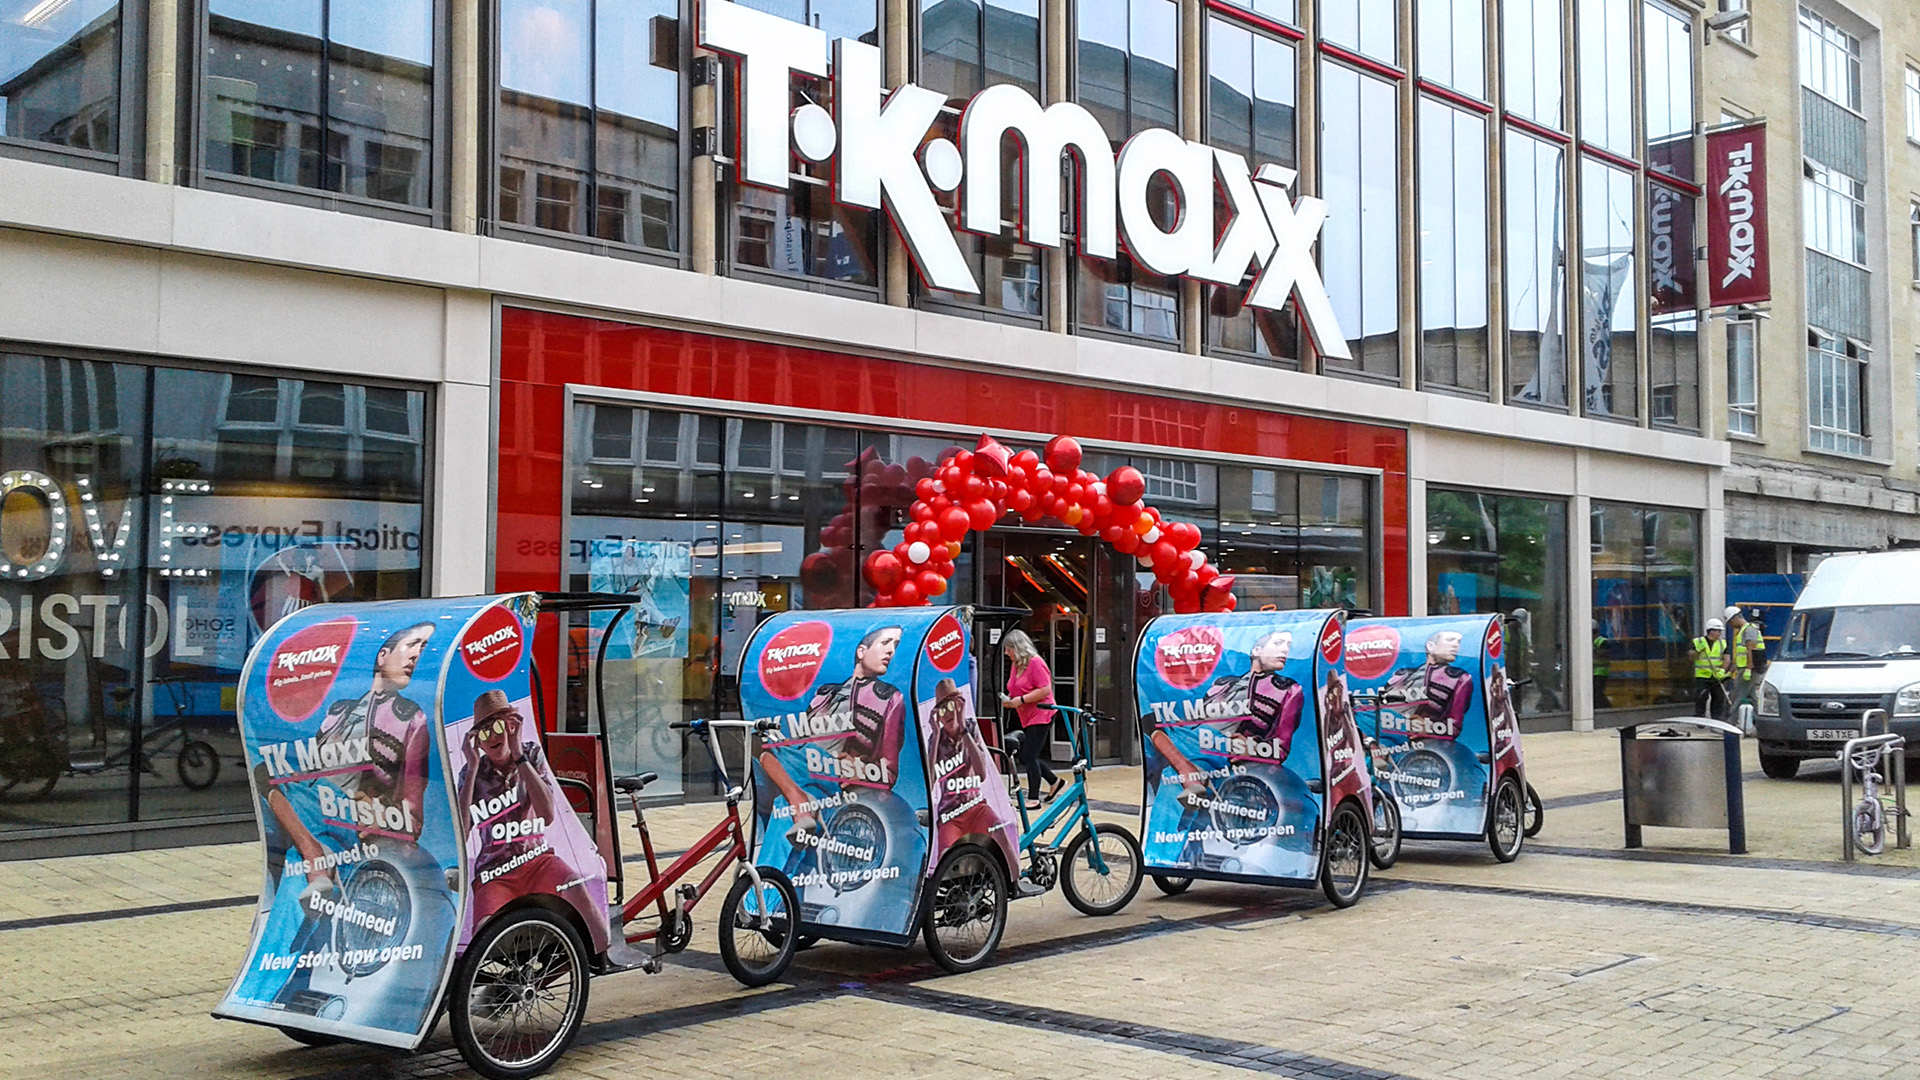 Tk Maxx advertising campaign using four pedicabs outside the store